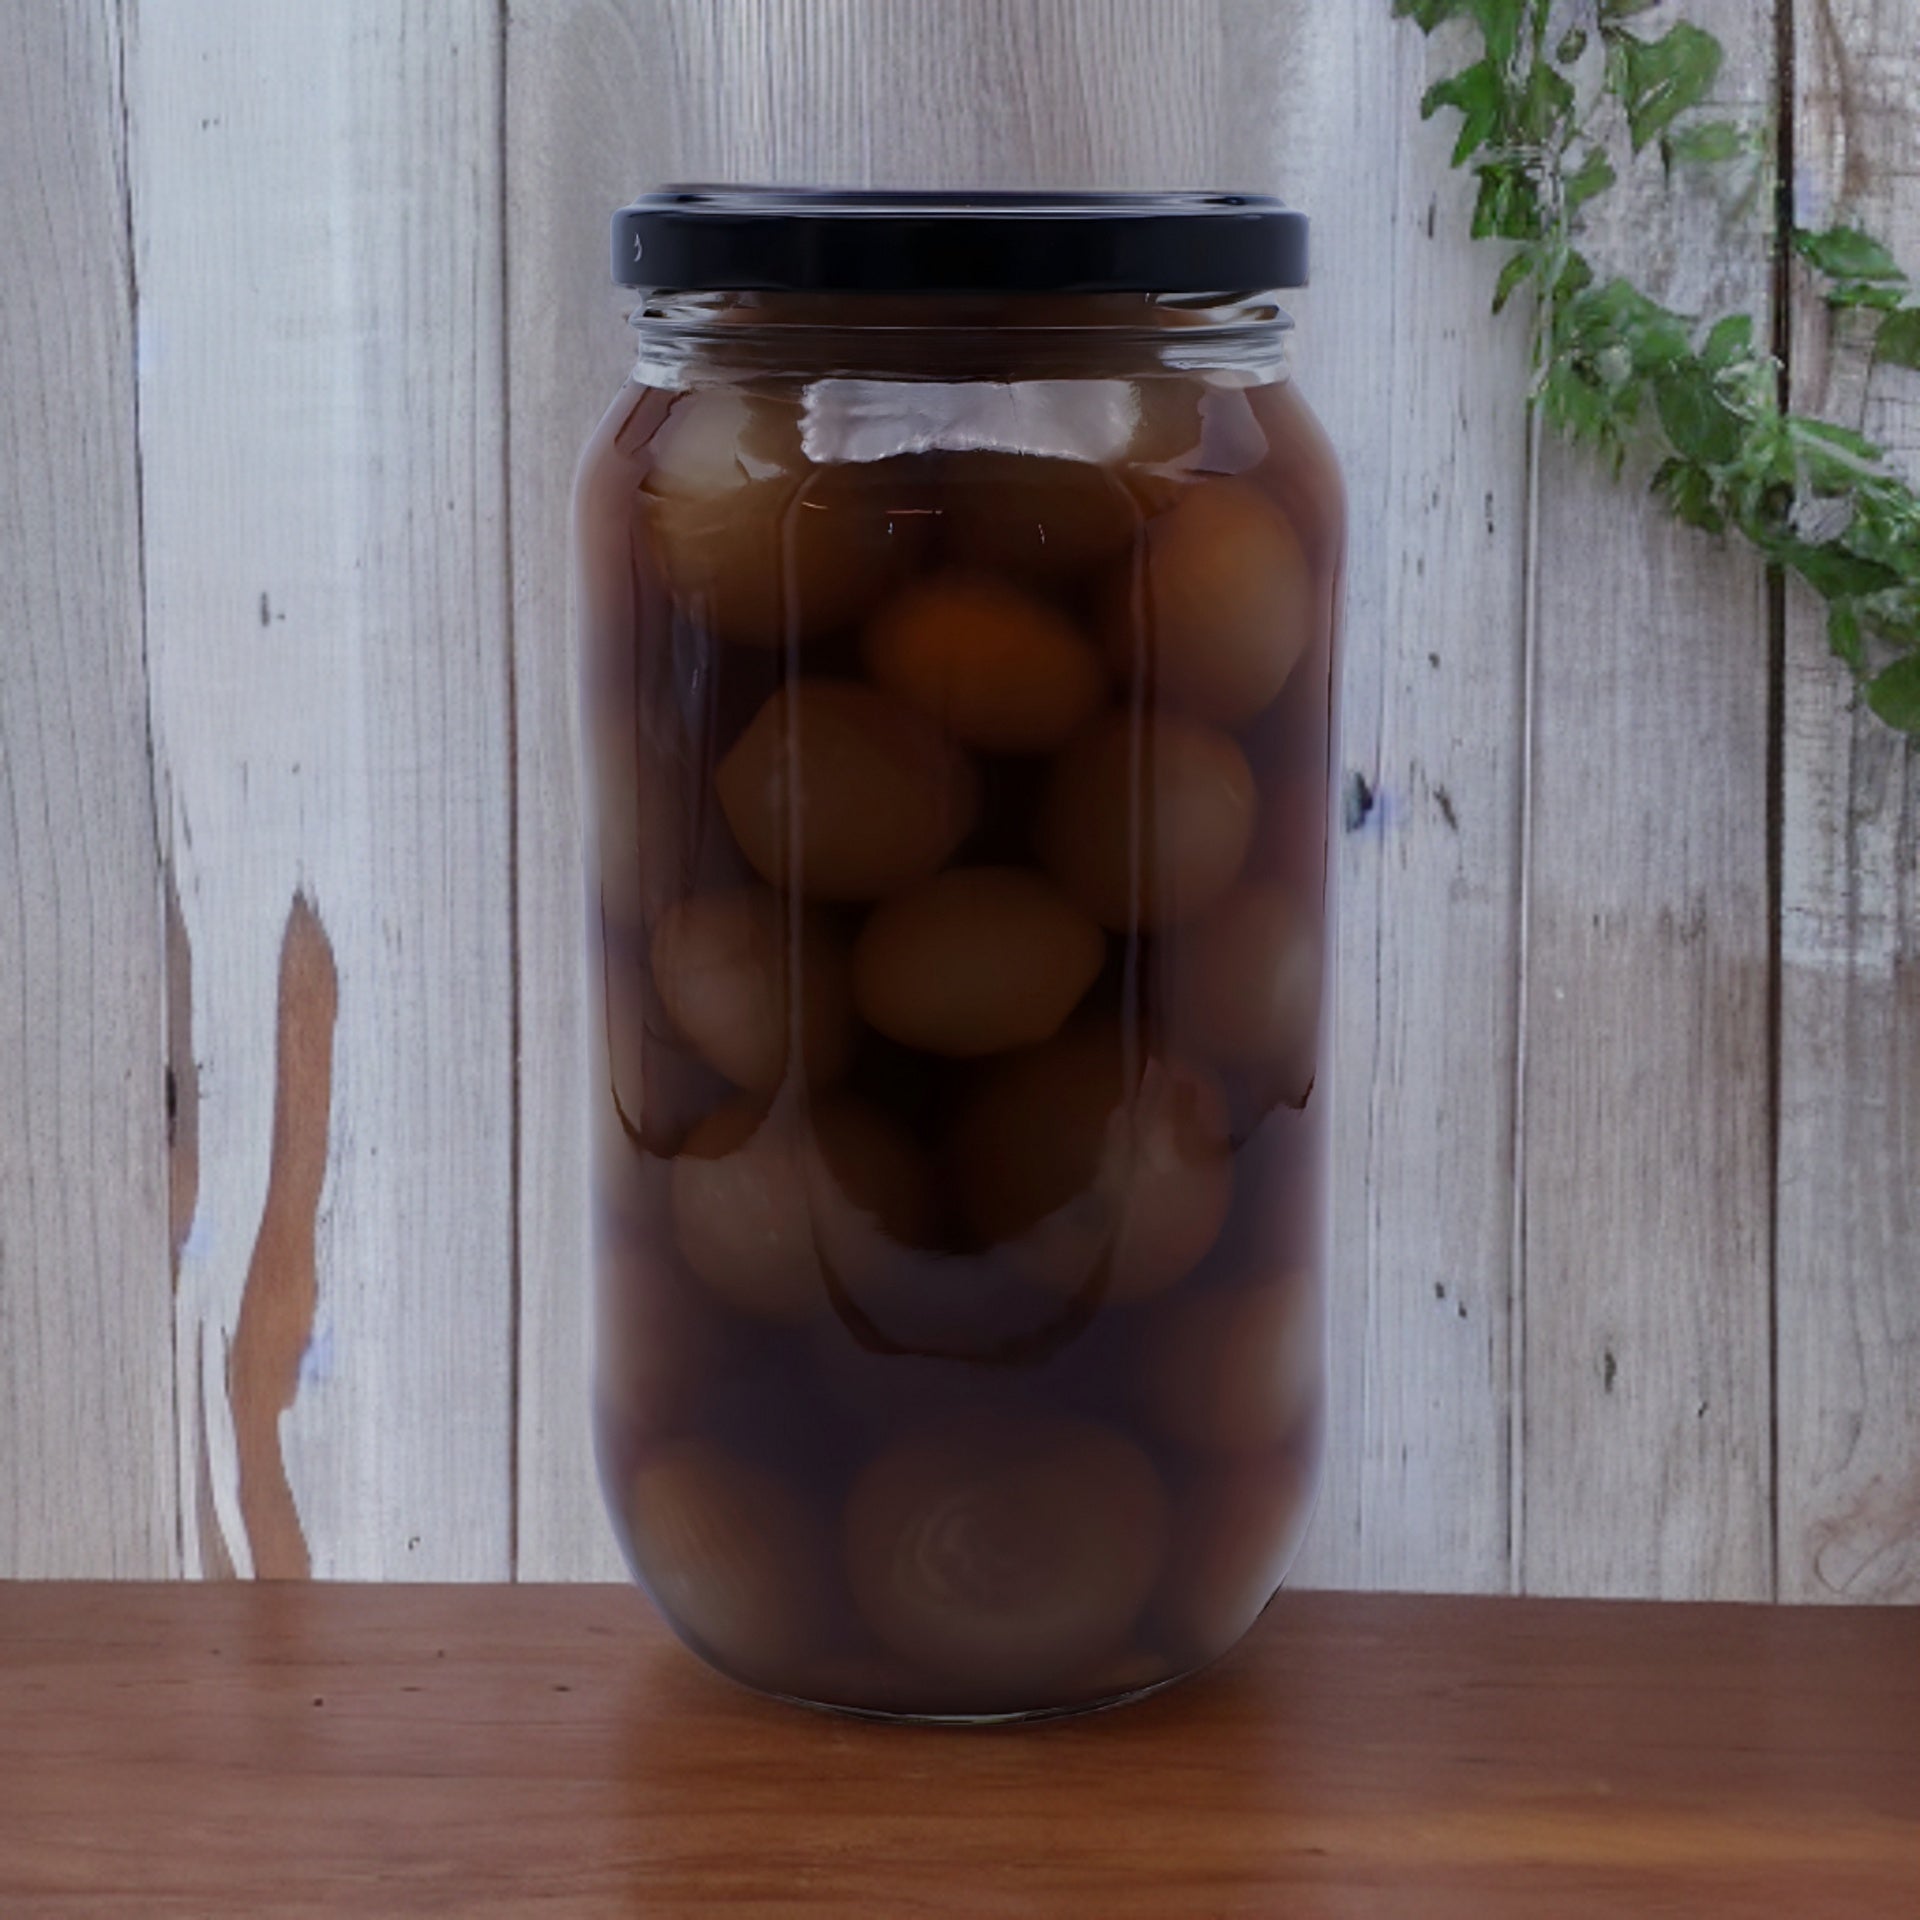 1L Round Glass Jar with an 82mm Black Twist cap, full of Pickled Onions